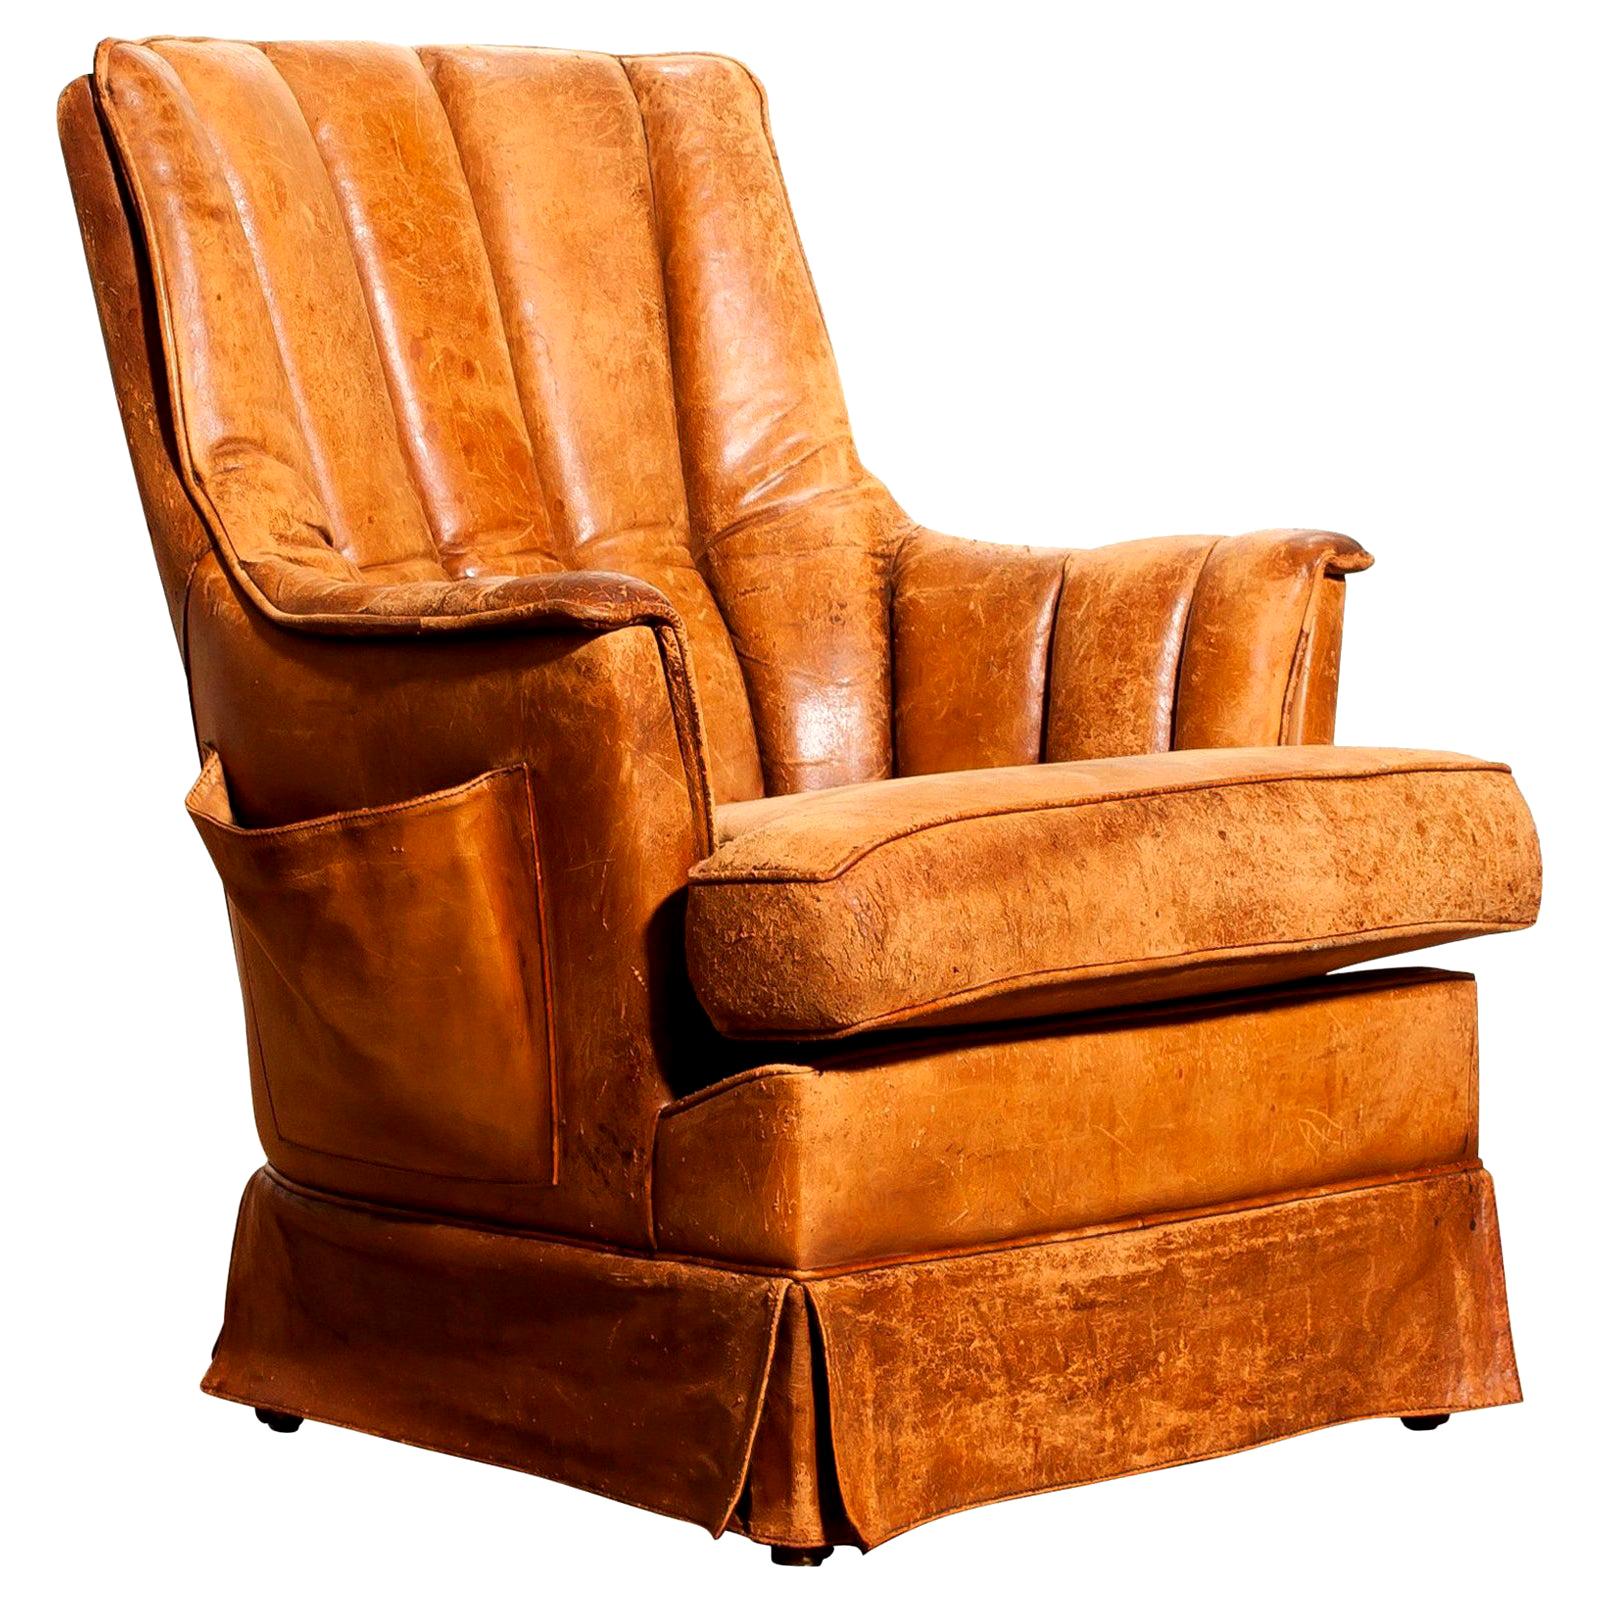 Fantastic club armchair from France.
This chair is made of leather with a skirt and a magazine bag on its side.
It has a greatly used patina.
Period 1940s.
Dimensions: H 85 cm x W 75 cm x D 68 cm x SH 46 cm.